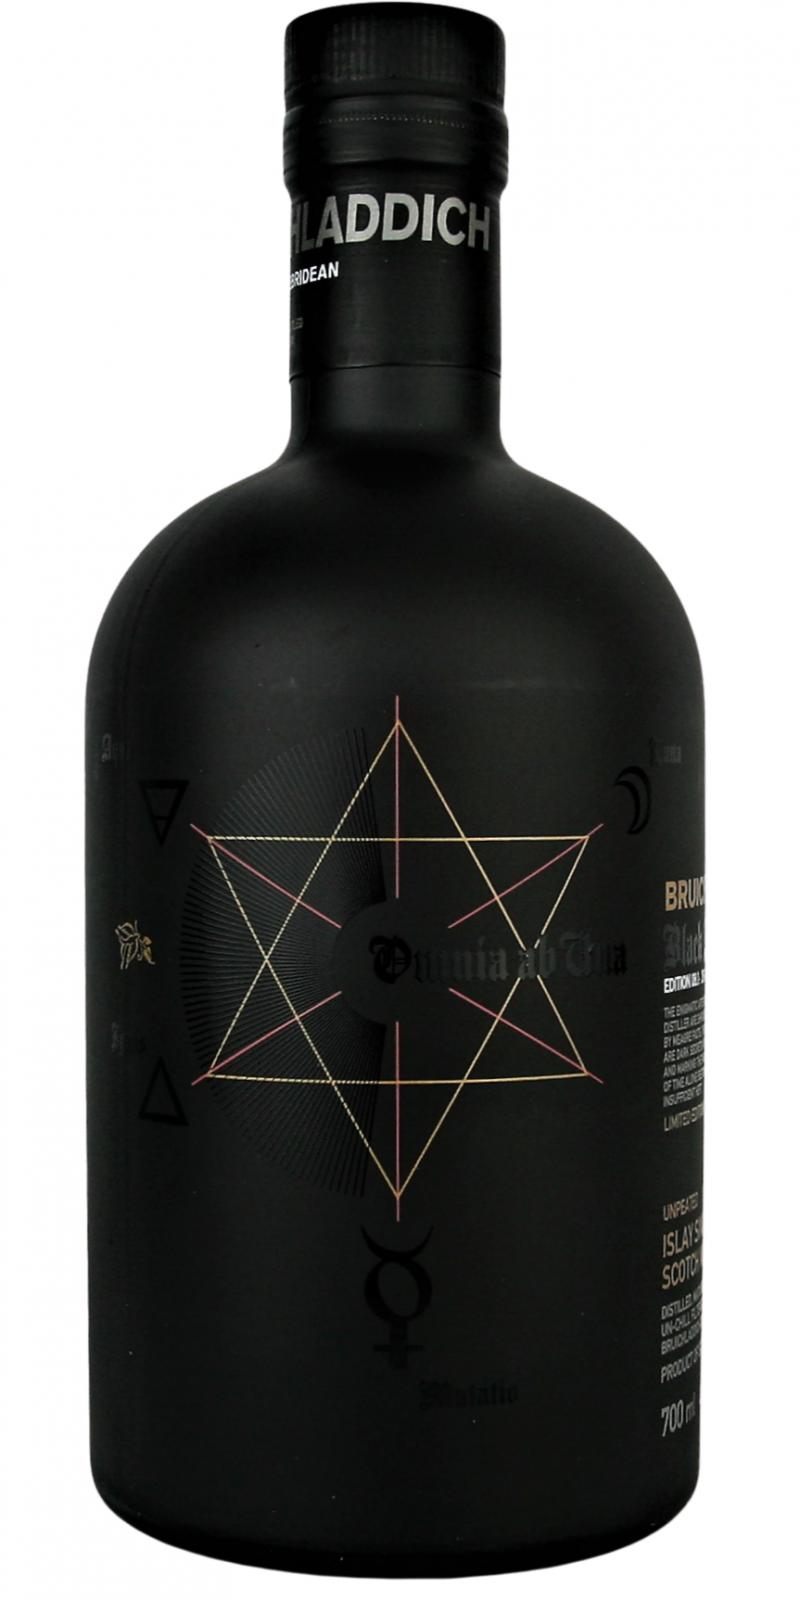 Bruichladdich Black Art 08.1 Ratings and reviews